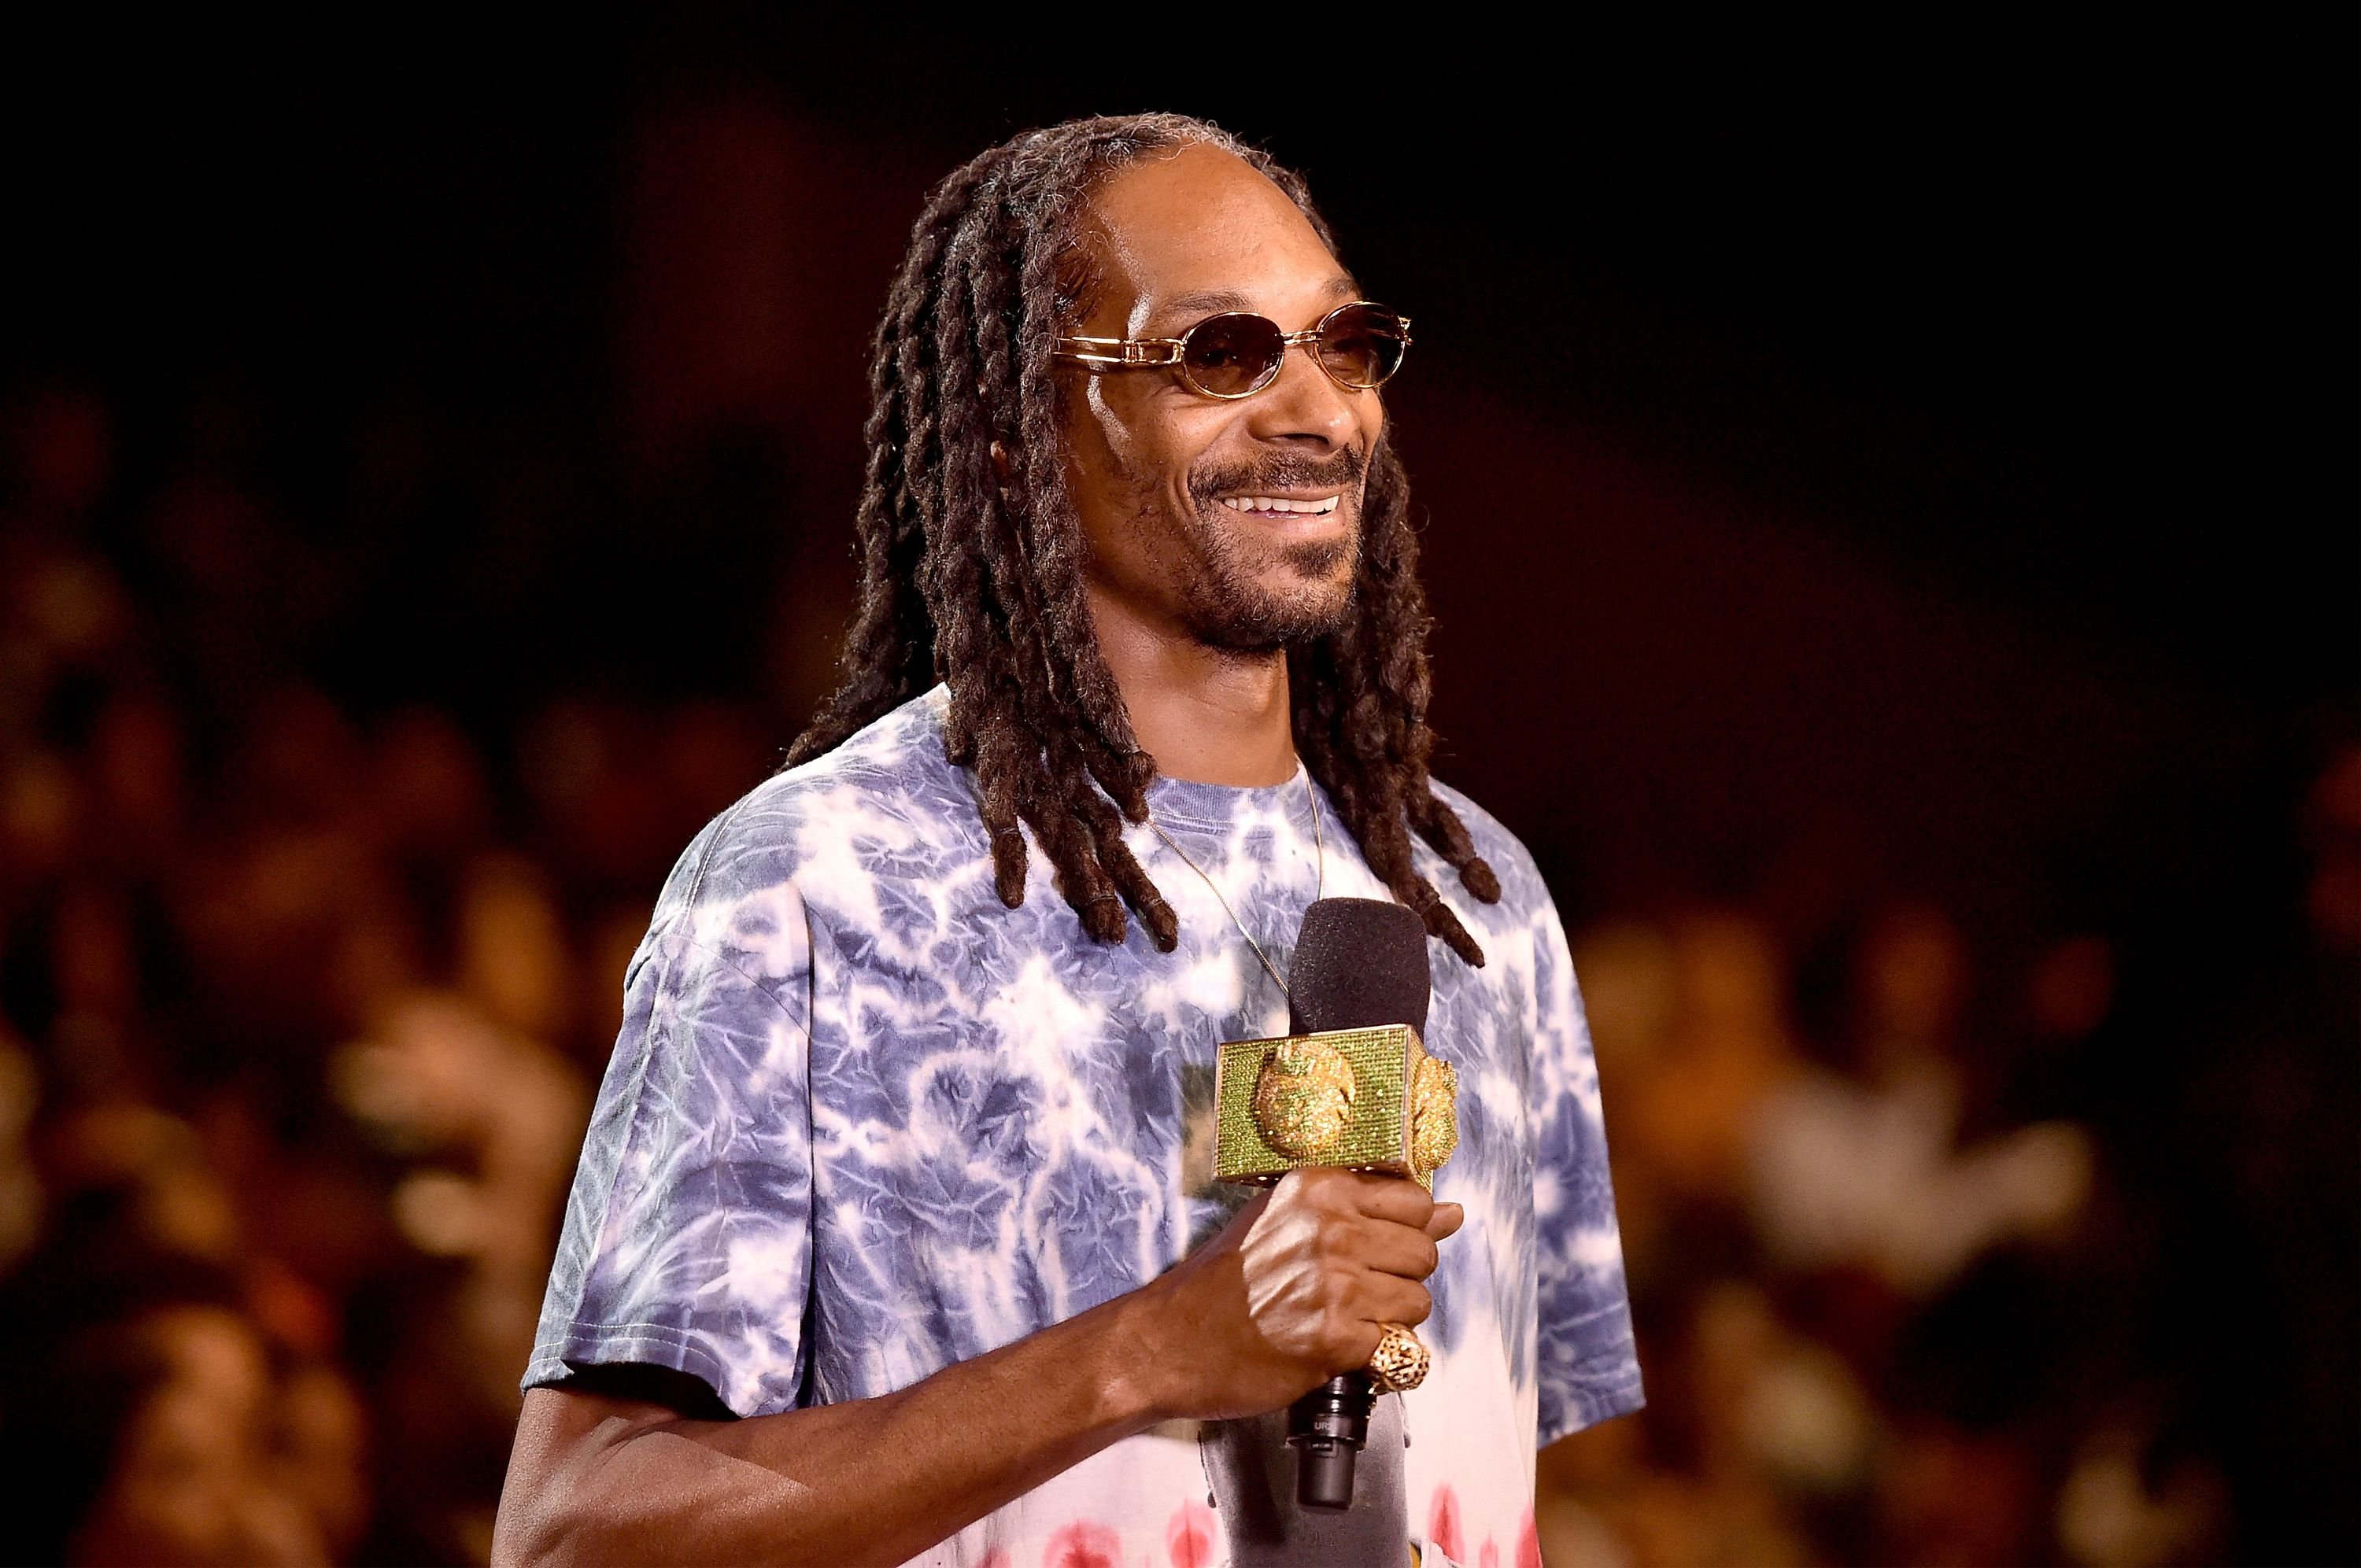 Snoop Dogg onstage at the BET Hip Hop Awards Show 2015| Photo: Getty Images